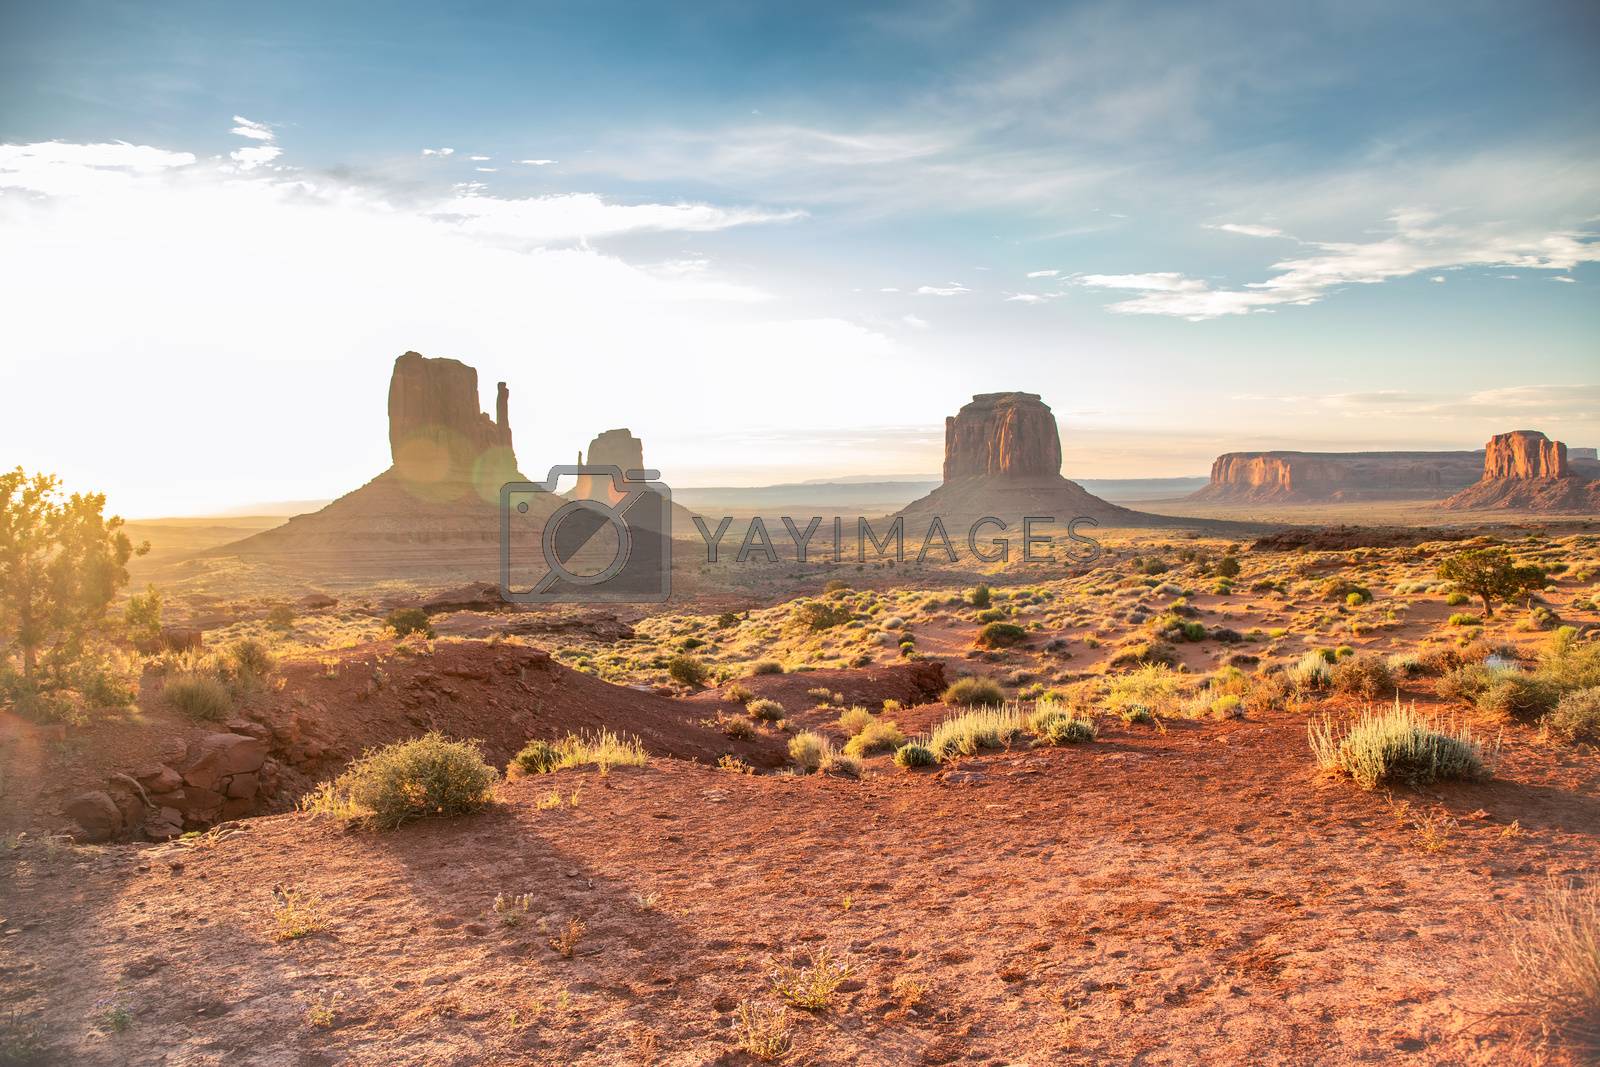 Royalty free image of Sunset in the monument valley, Arizona by jovannig